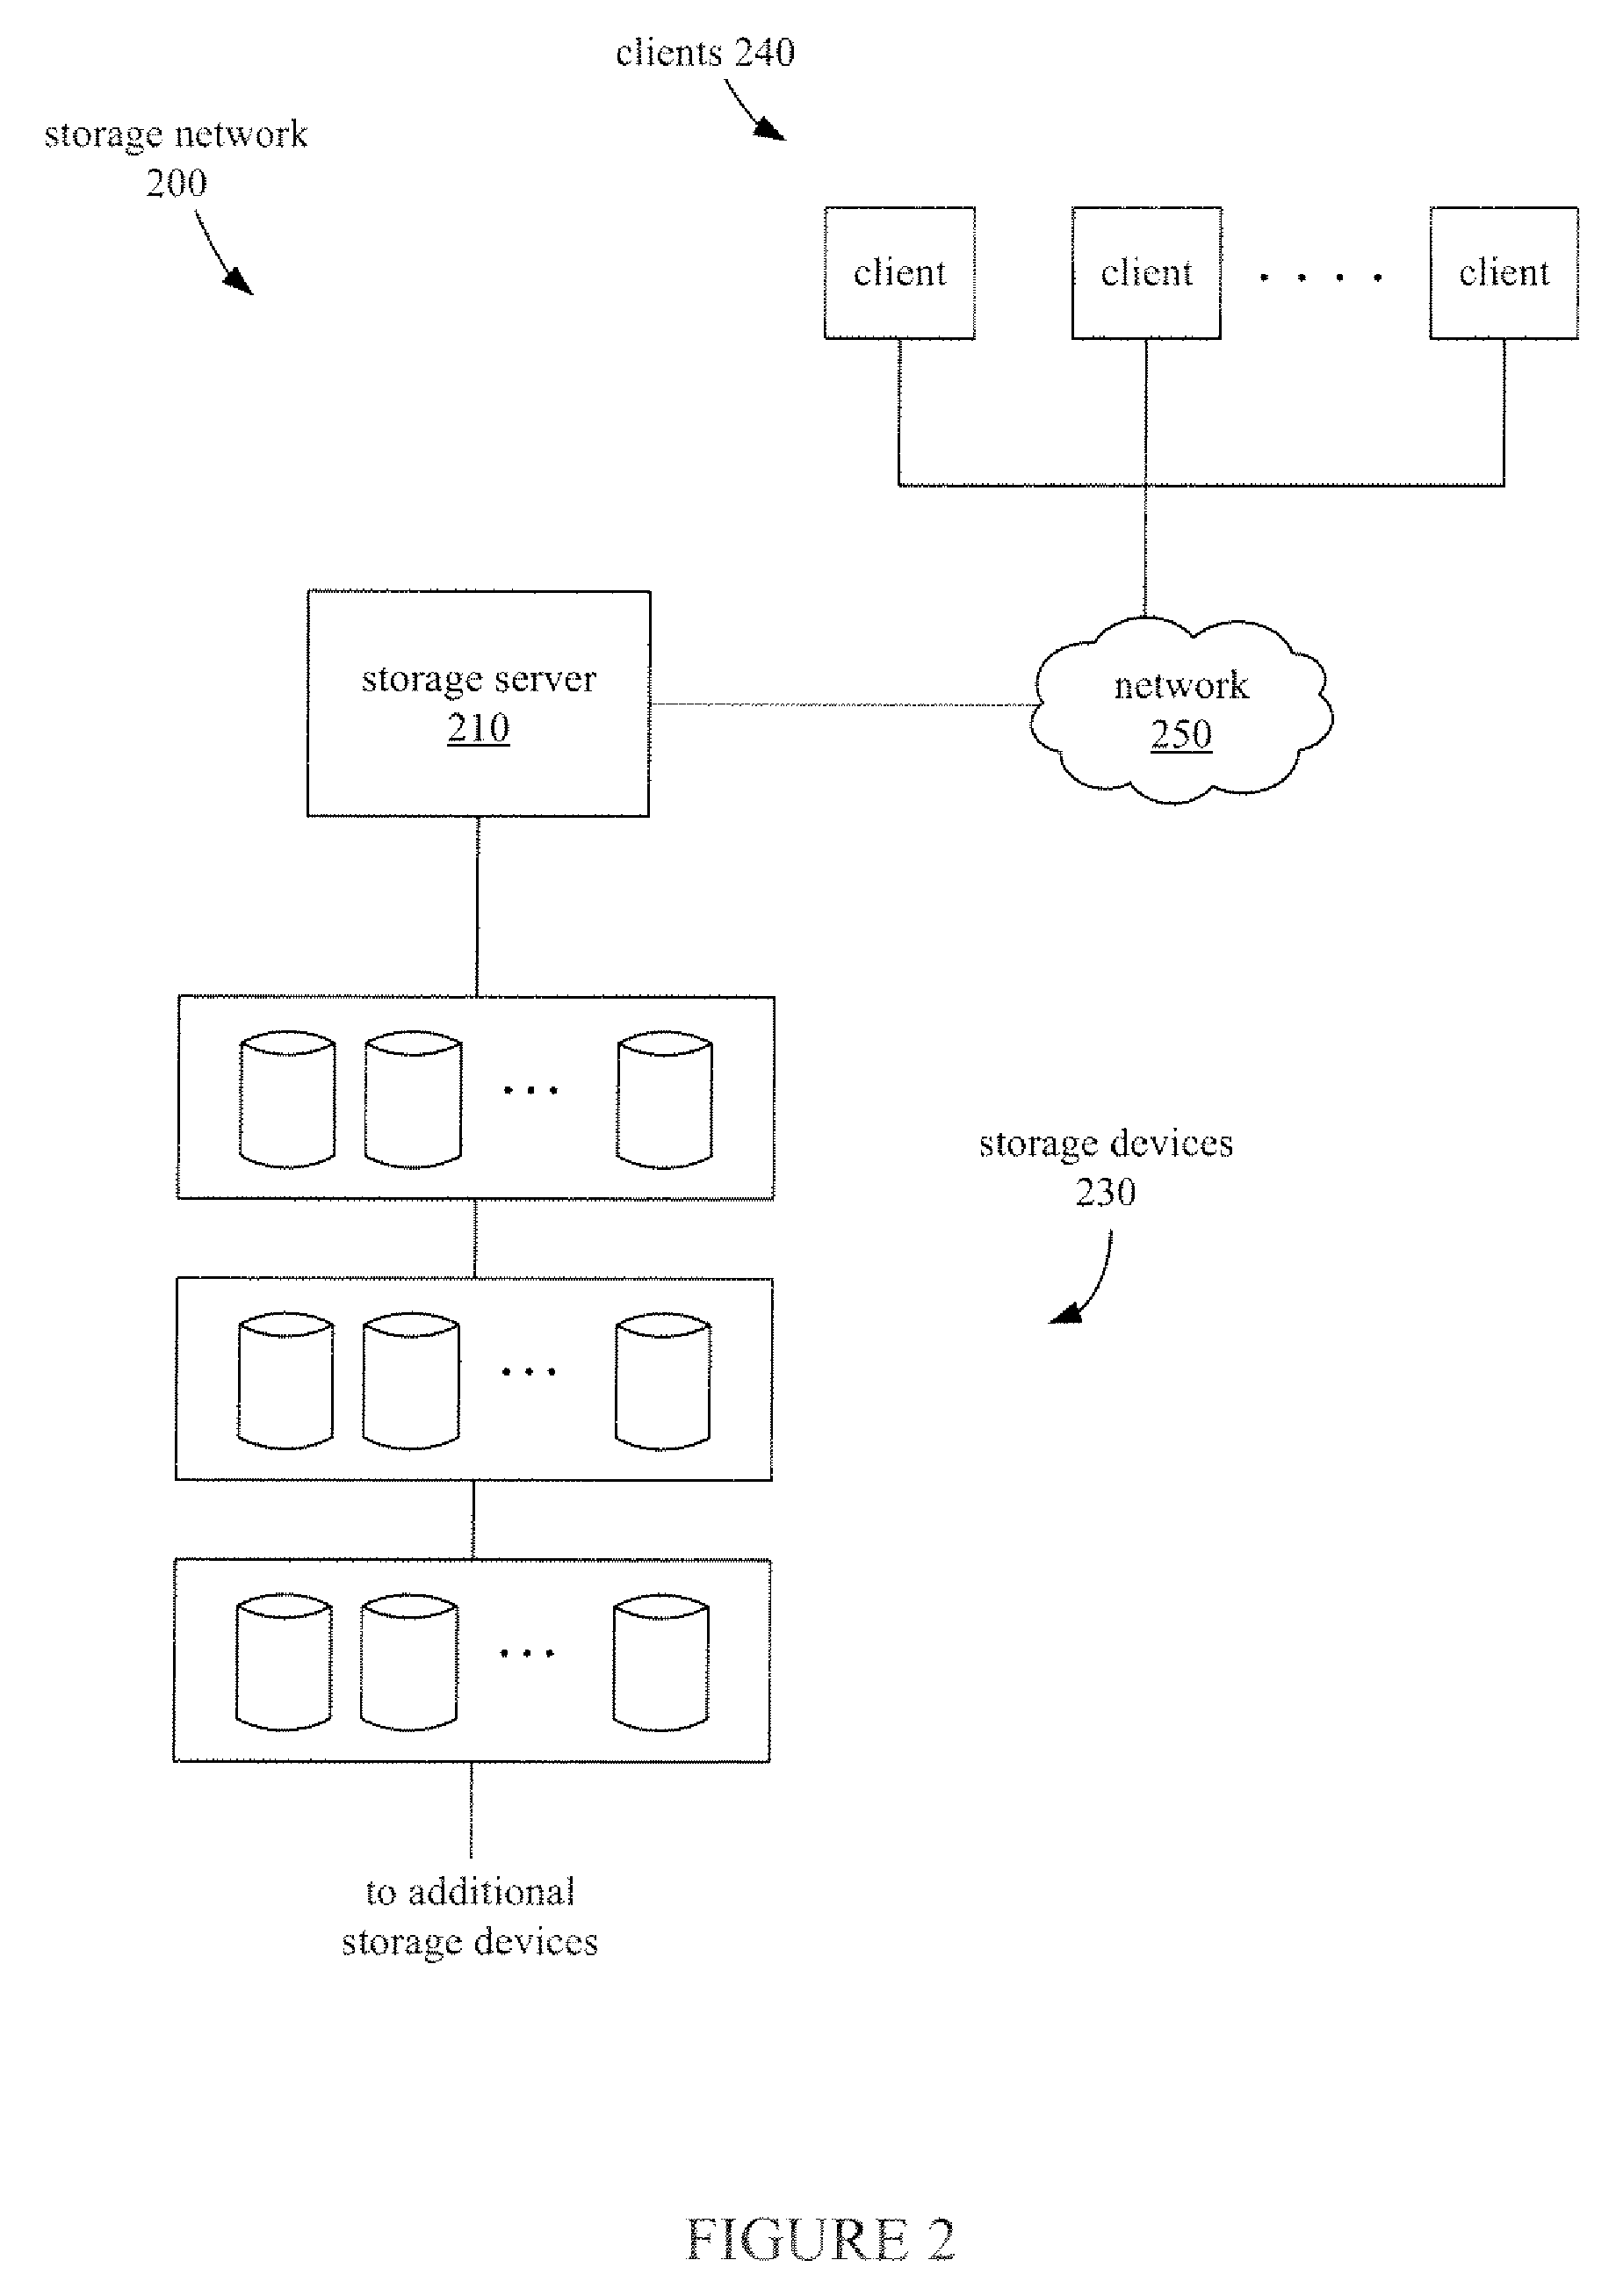 Nearstore compression of data in a storage system